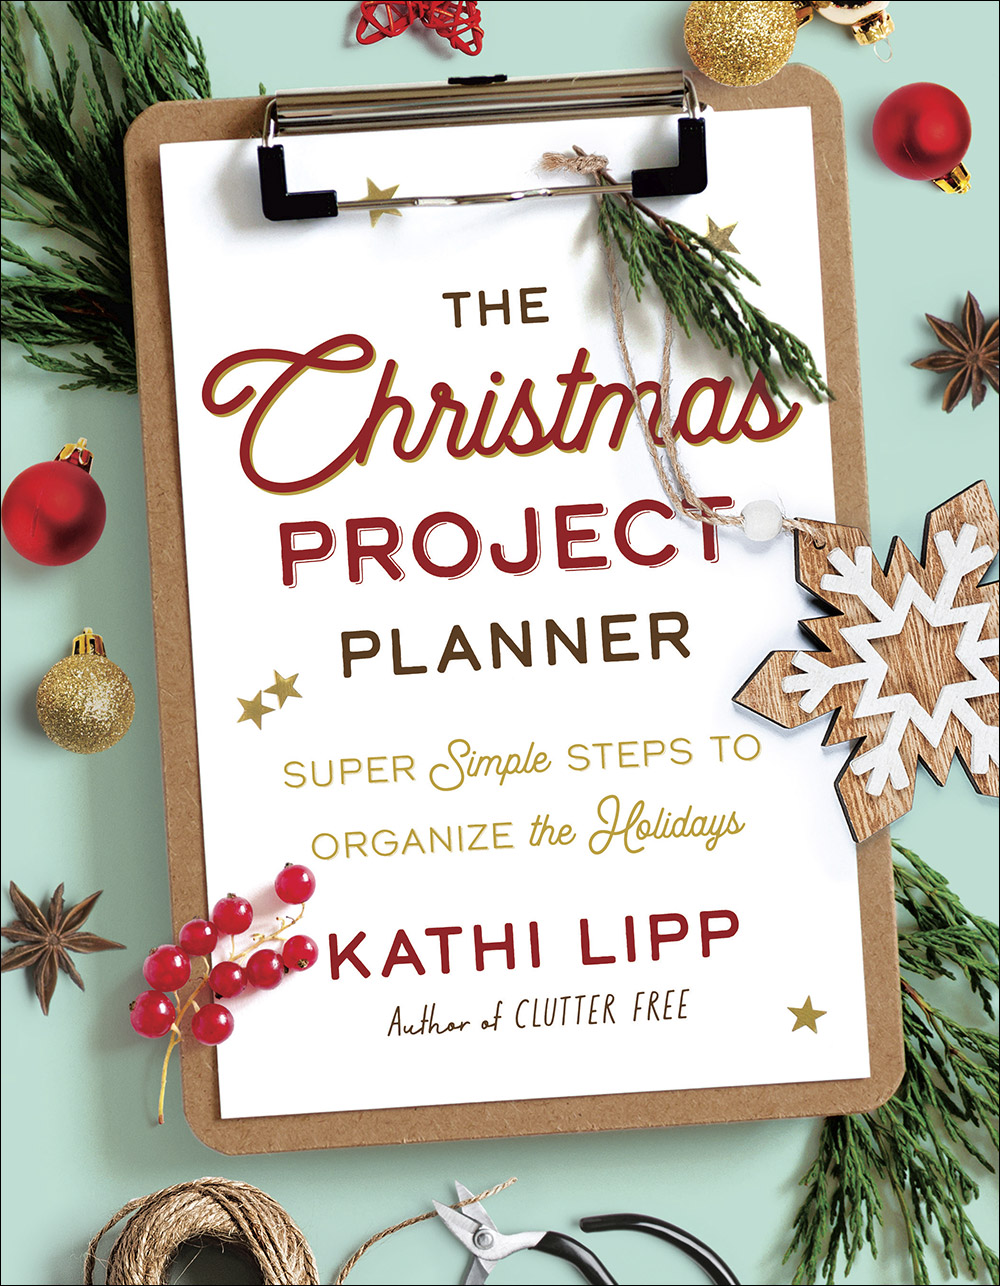 Read The Christmas Project Planner: Super Simple Steps to Organize the Holidays - Kathi Lipp file in ePub